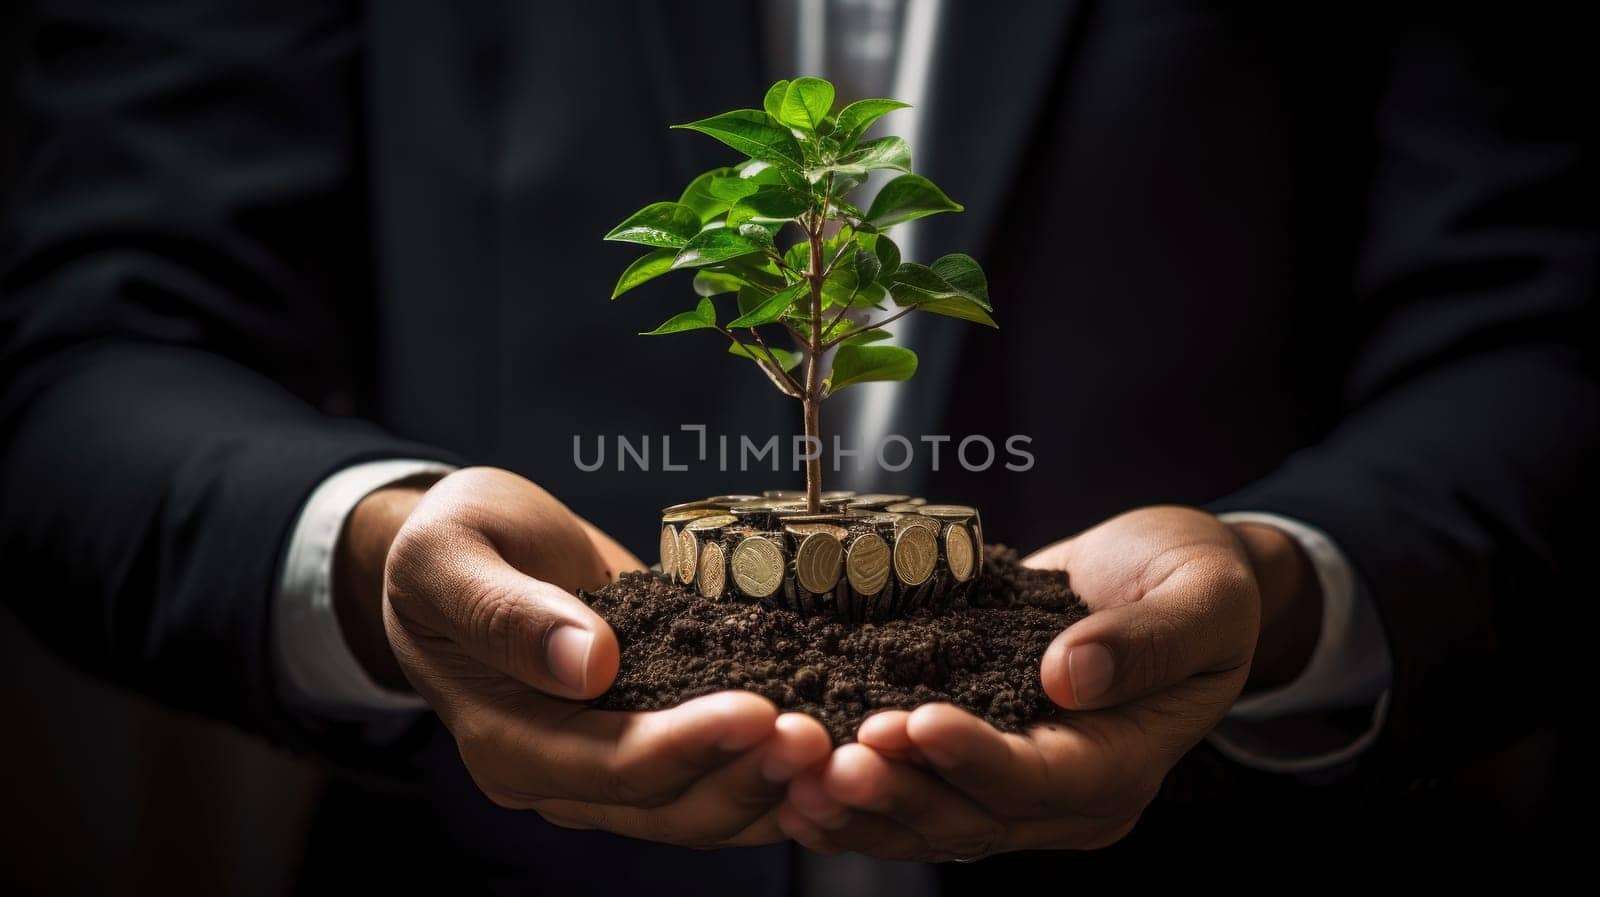 Sapling Thrives on a Hand Grasping Silver Coins. Capturing Green Business Concepts for Finance and Investment. Symbolic Representation of Carbon Credits and Eco-Friendly Taxation Strategies